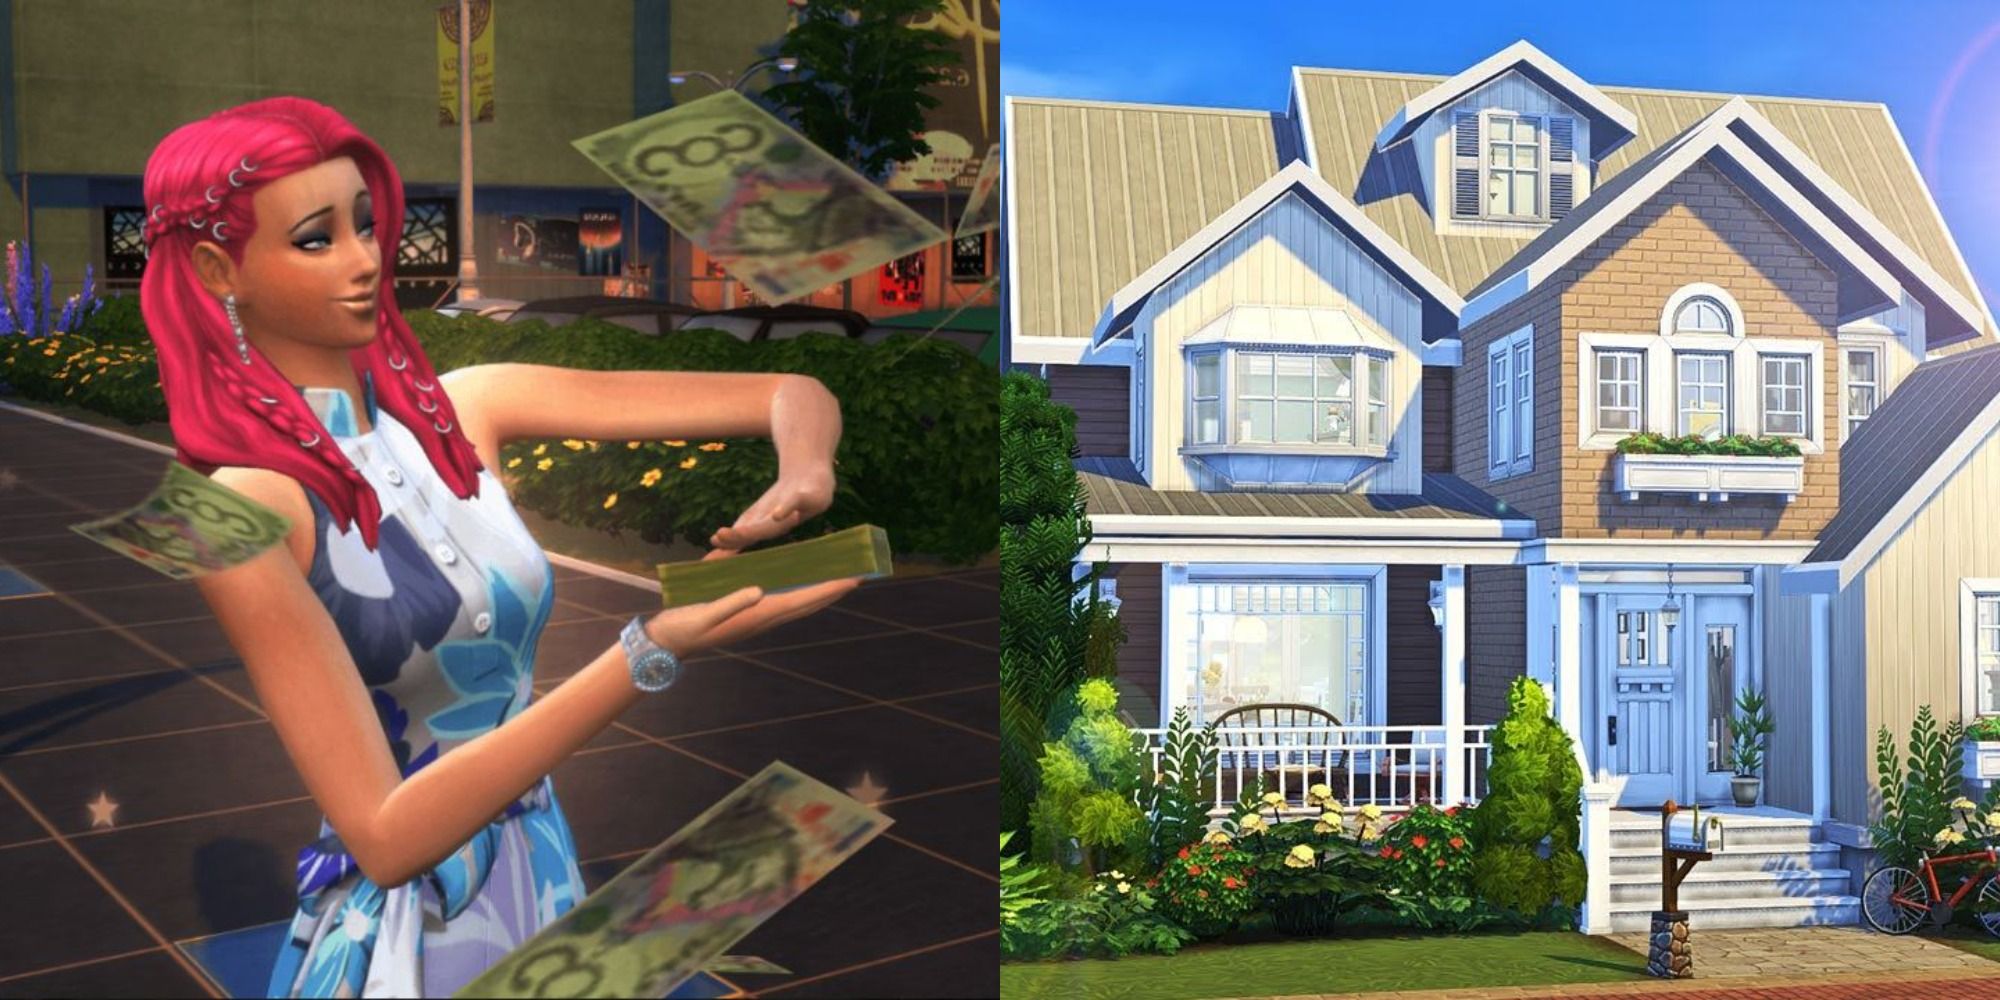 Sims 4: Necessary Cheats & Hacks To Help Beginners Get Started